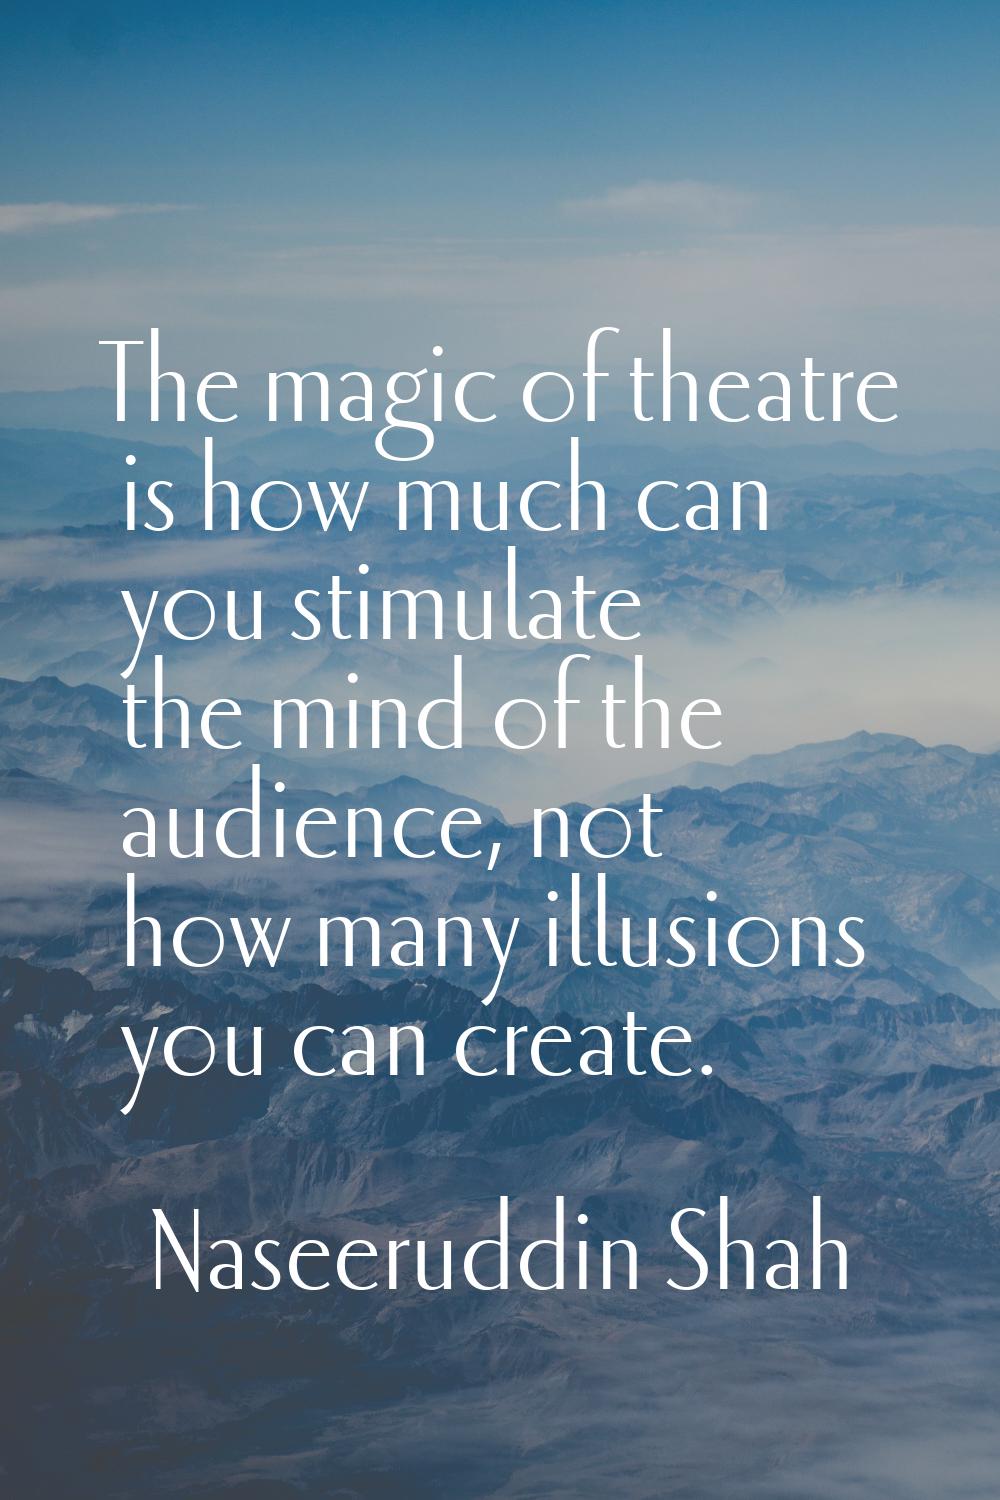 The magic of theatre is how much can you stimulate the mind of the audience, not how many illusions